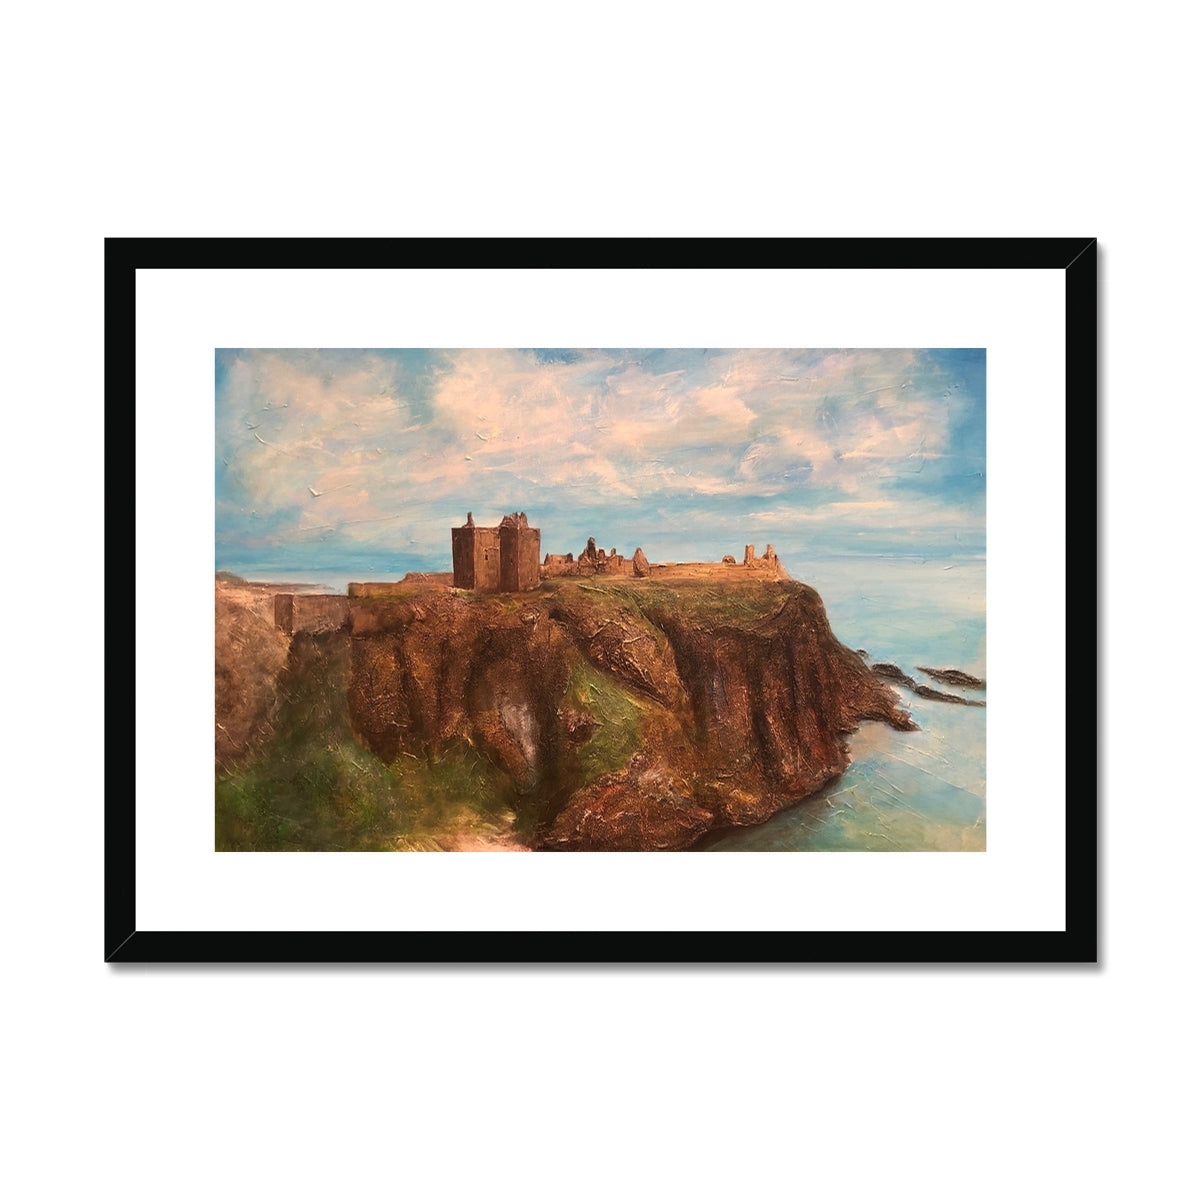 Dunnottar Castle Painting | Framed & Mounted Prints From Scotland-Framed & Mounted Prints-Historic & Iconic Scotland Art Gallery-A2 Landscape-Black Frame-Paintings, Prints, Homeware, Art Gifts From Scotland By Scottish Artist Kevin Hunter